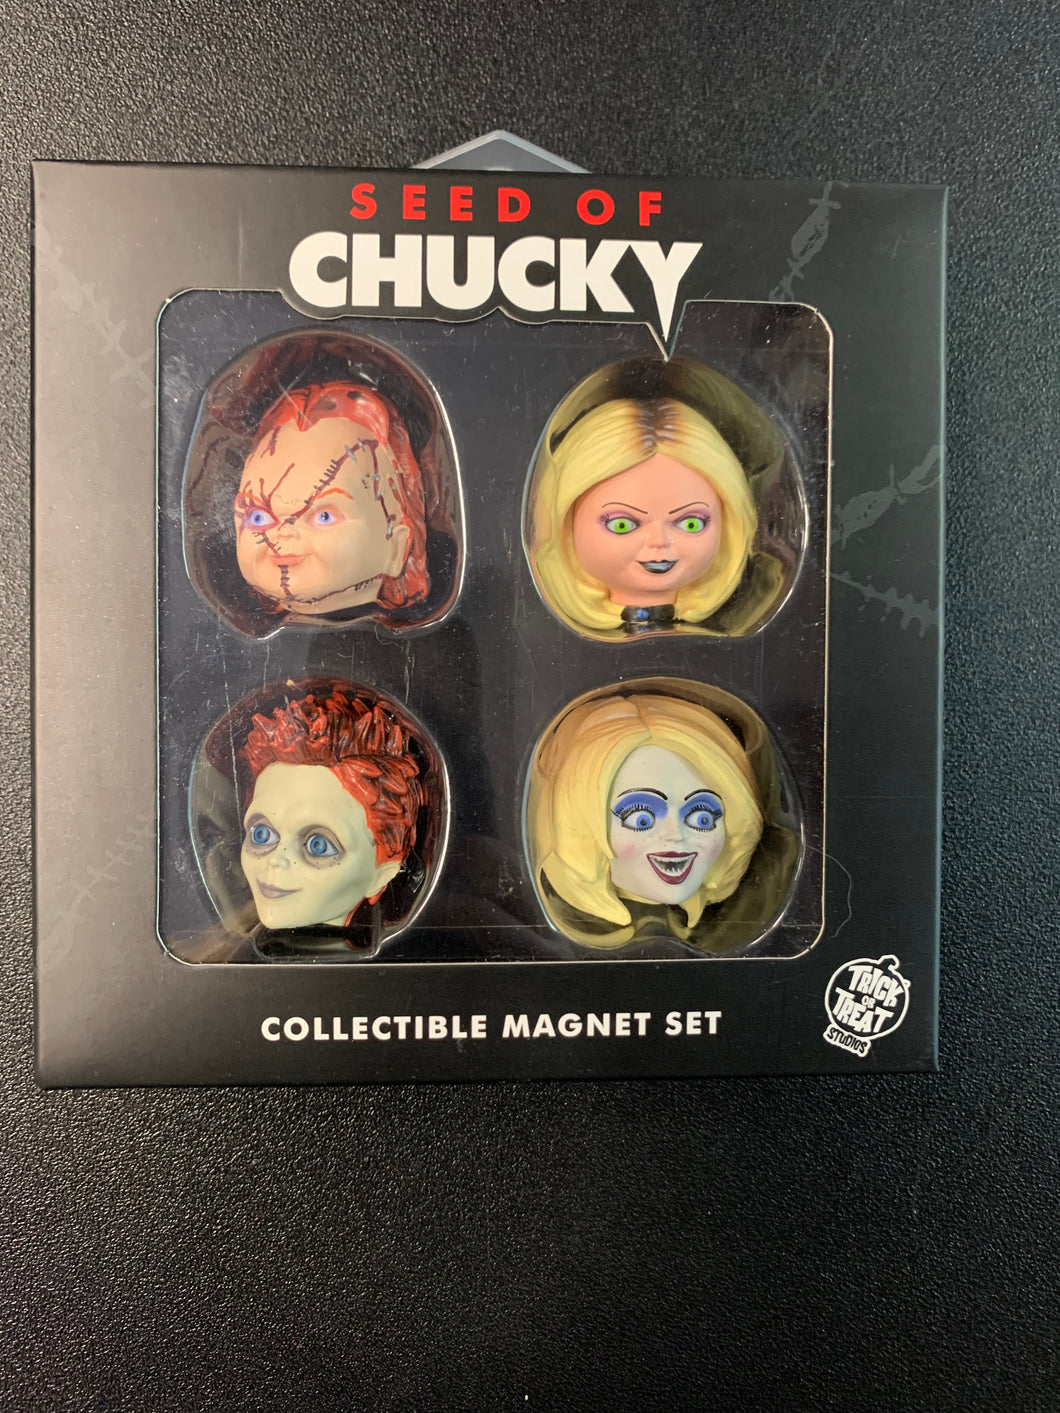 SEED OF CHUCKY - MAGNET SET